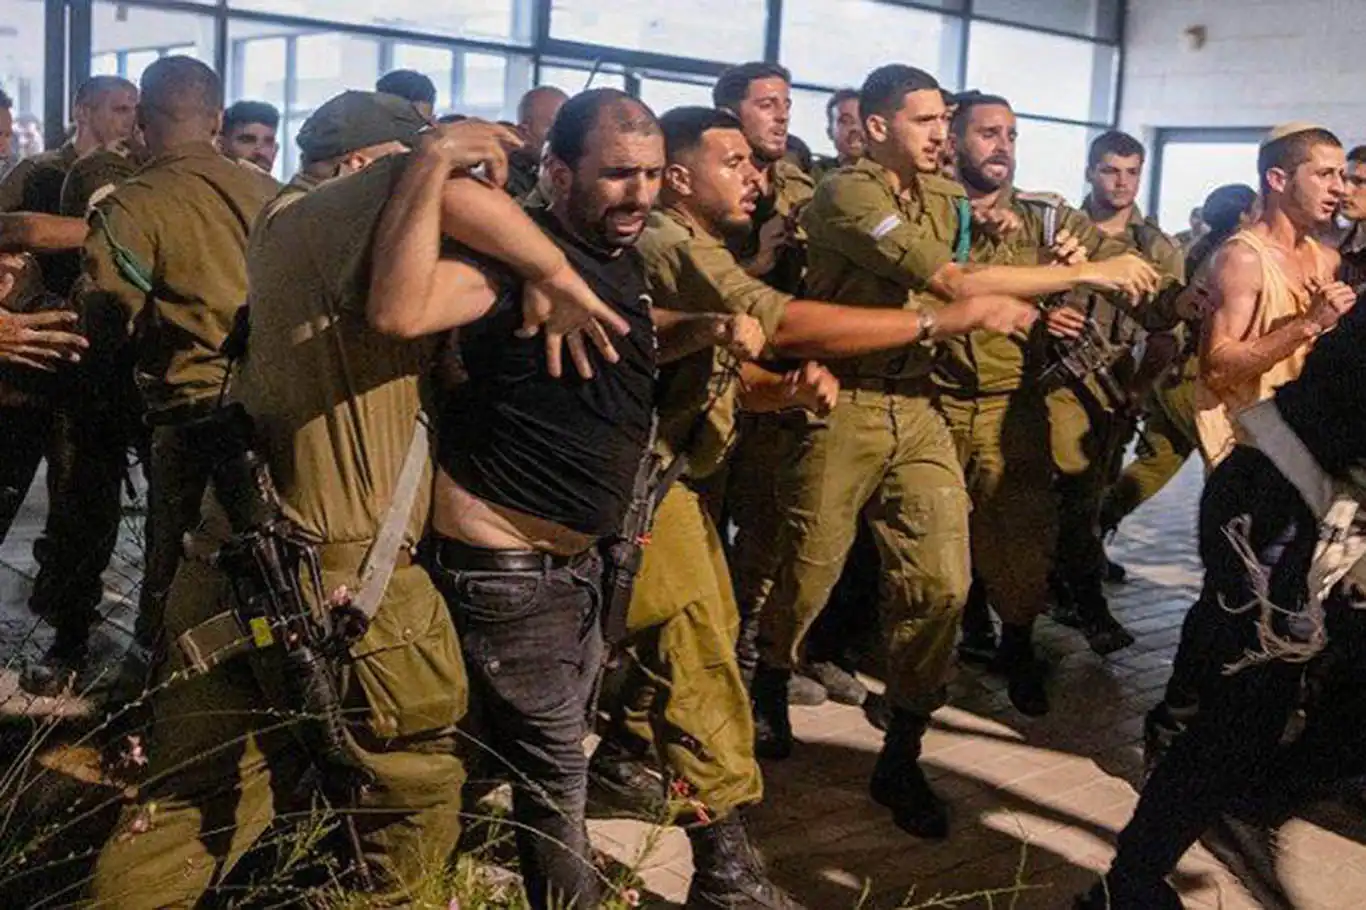 Israeli protesters storm army bases in support of soldiers accused of detainee abuse